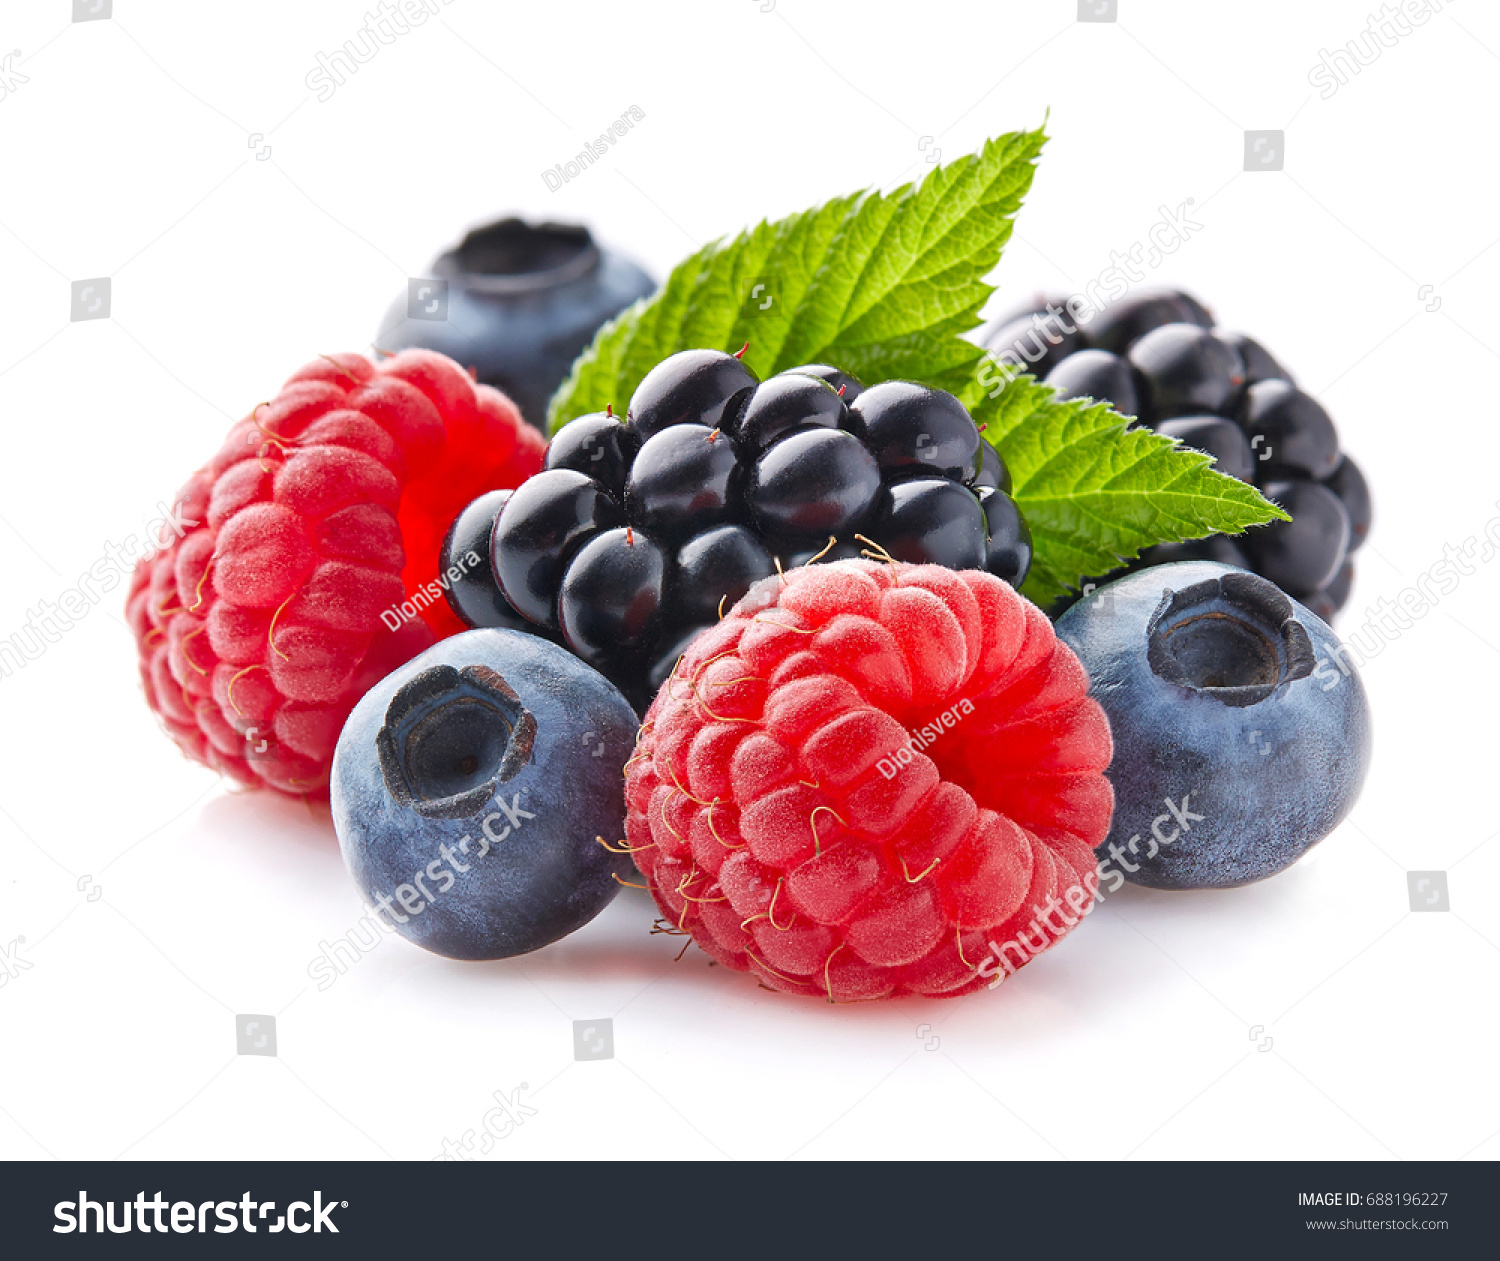 Mix berries with leaf #688196227